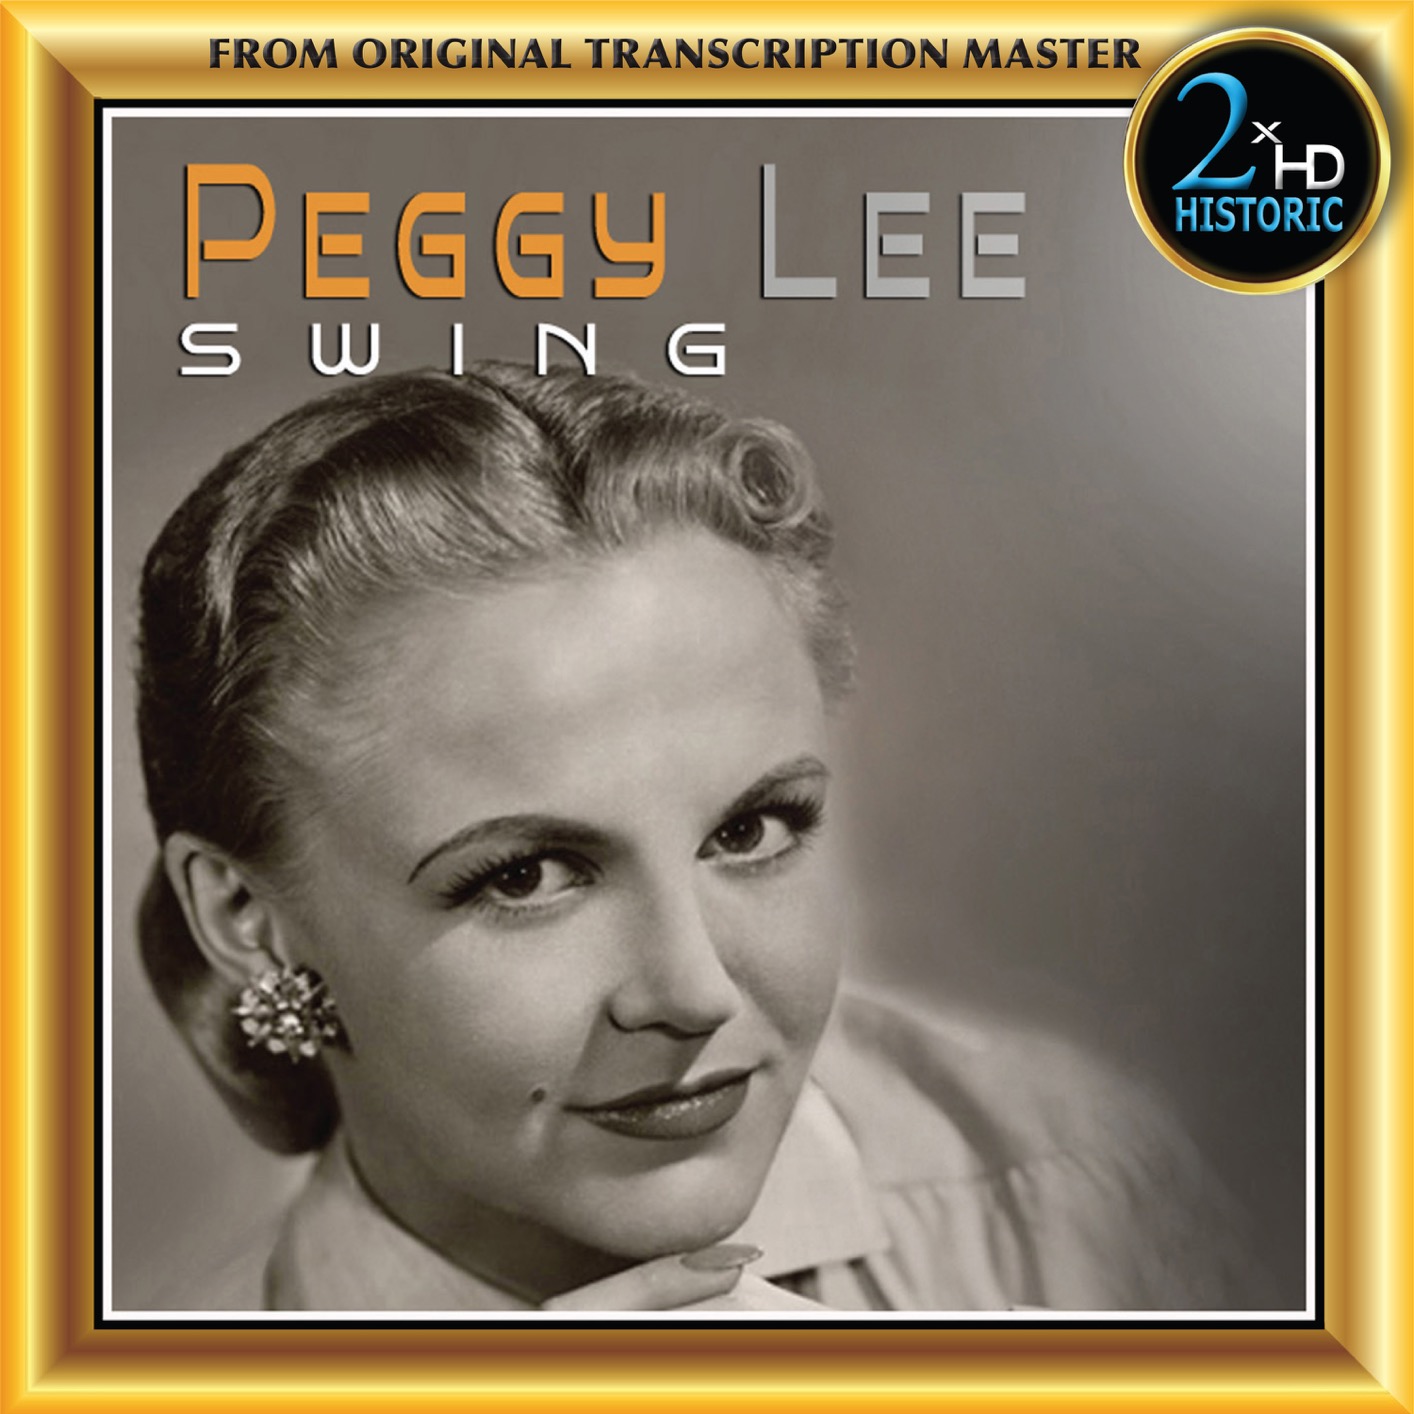 Peggy Lee – SWING (Remastered) (2020) [FLAC 24bit/192kHz]